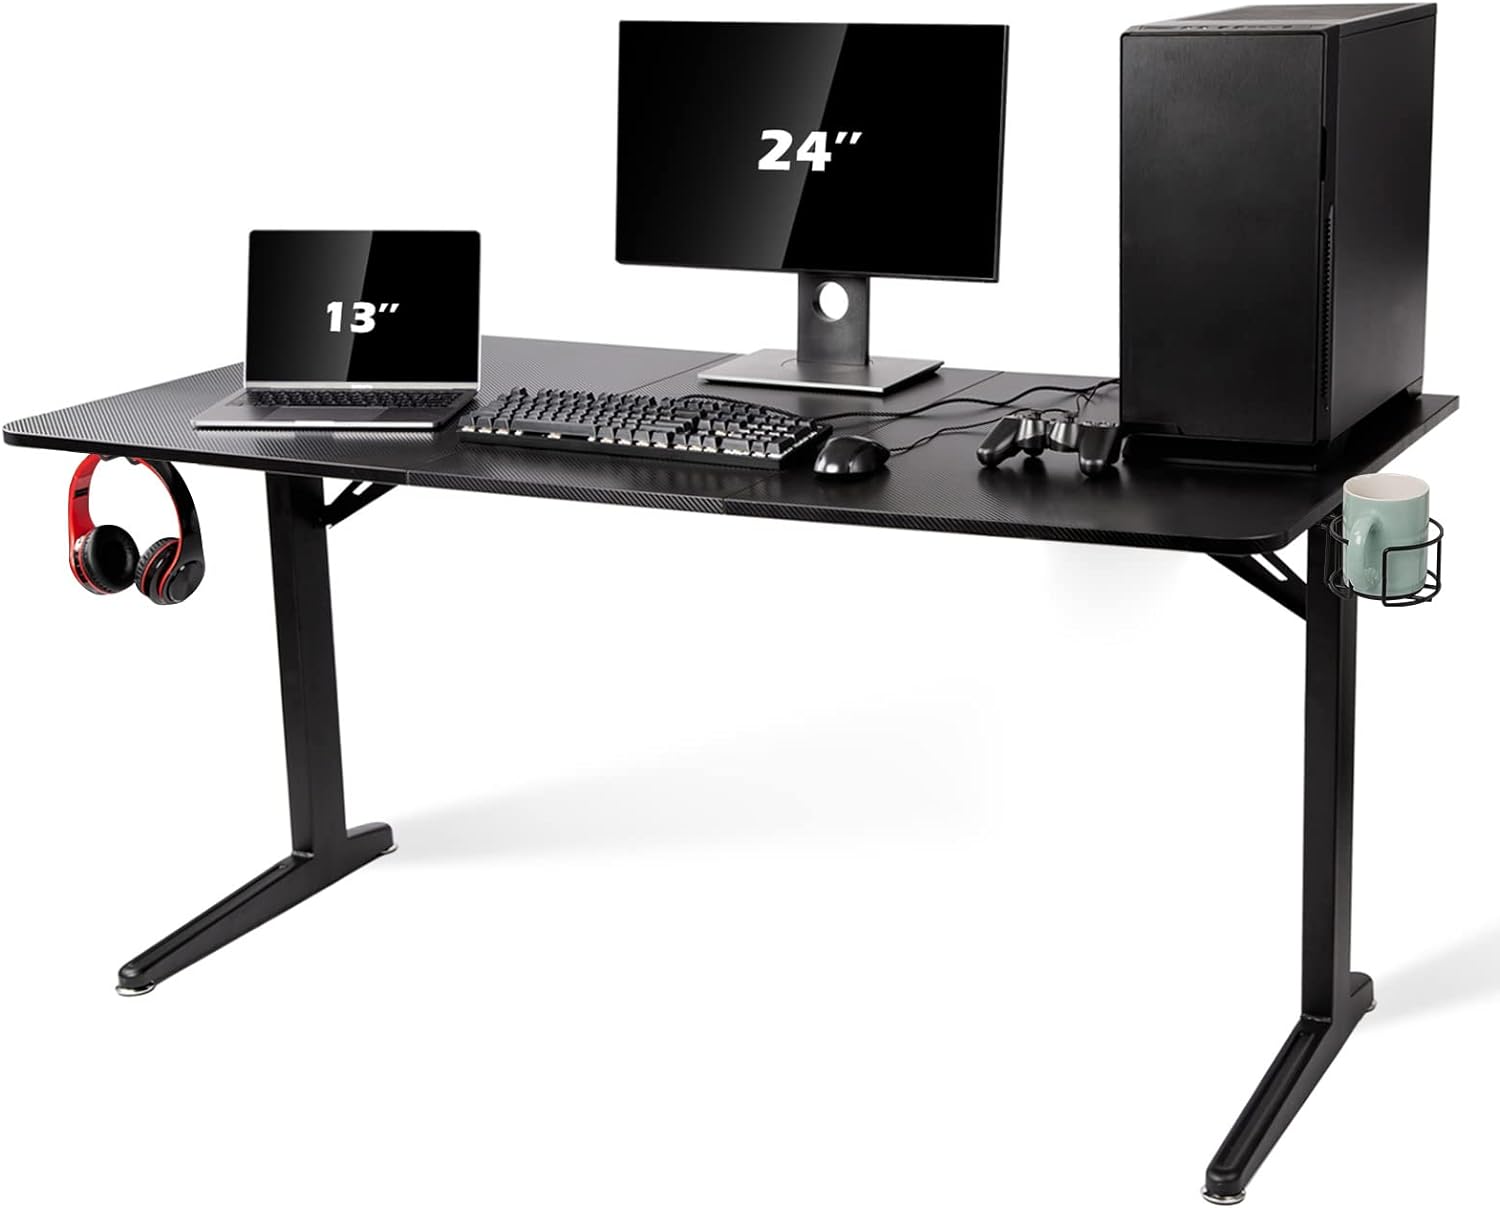 Delivered today and assembled just a bit ago. Very impressed already. I'll mention that I was looking at another desk on Amazon that was similar size and designed for gamers, but I went with this one because it was a few inches wider and deeper and it was rated higher for weight limit. I was also looking at IKEA because I liked the idea and look of a solid wood top, but not only are they more expensive they're always out of stock. So I didn't want to keep waiting and just went with this one.I'll